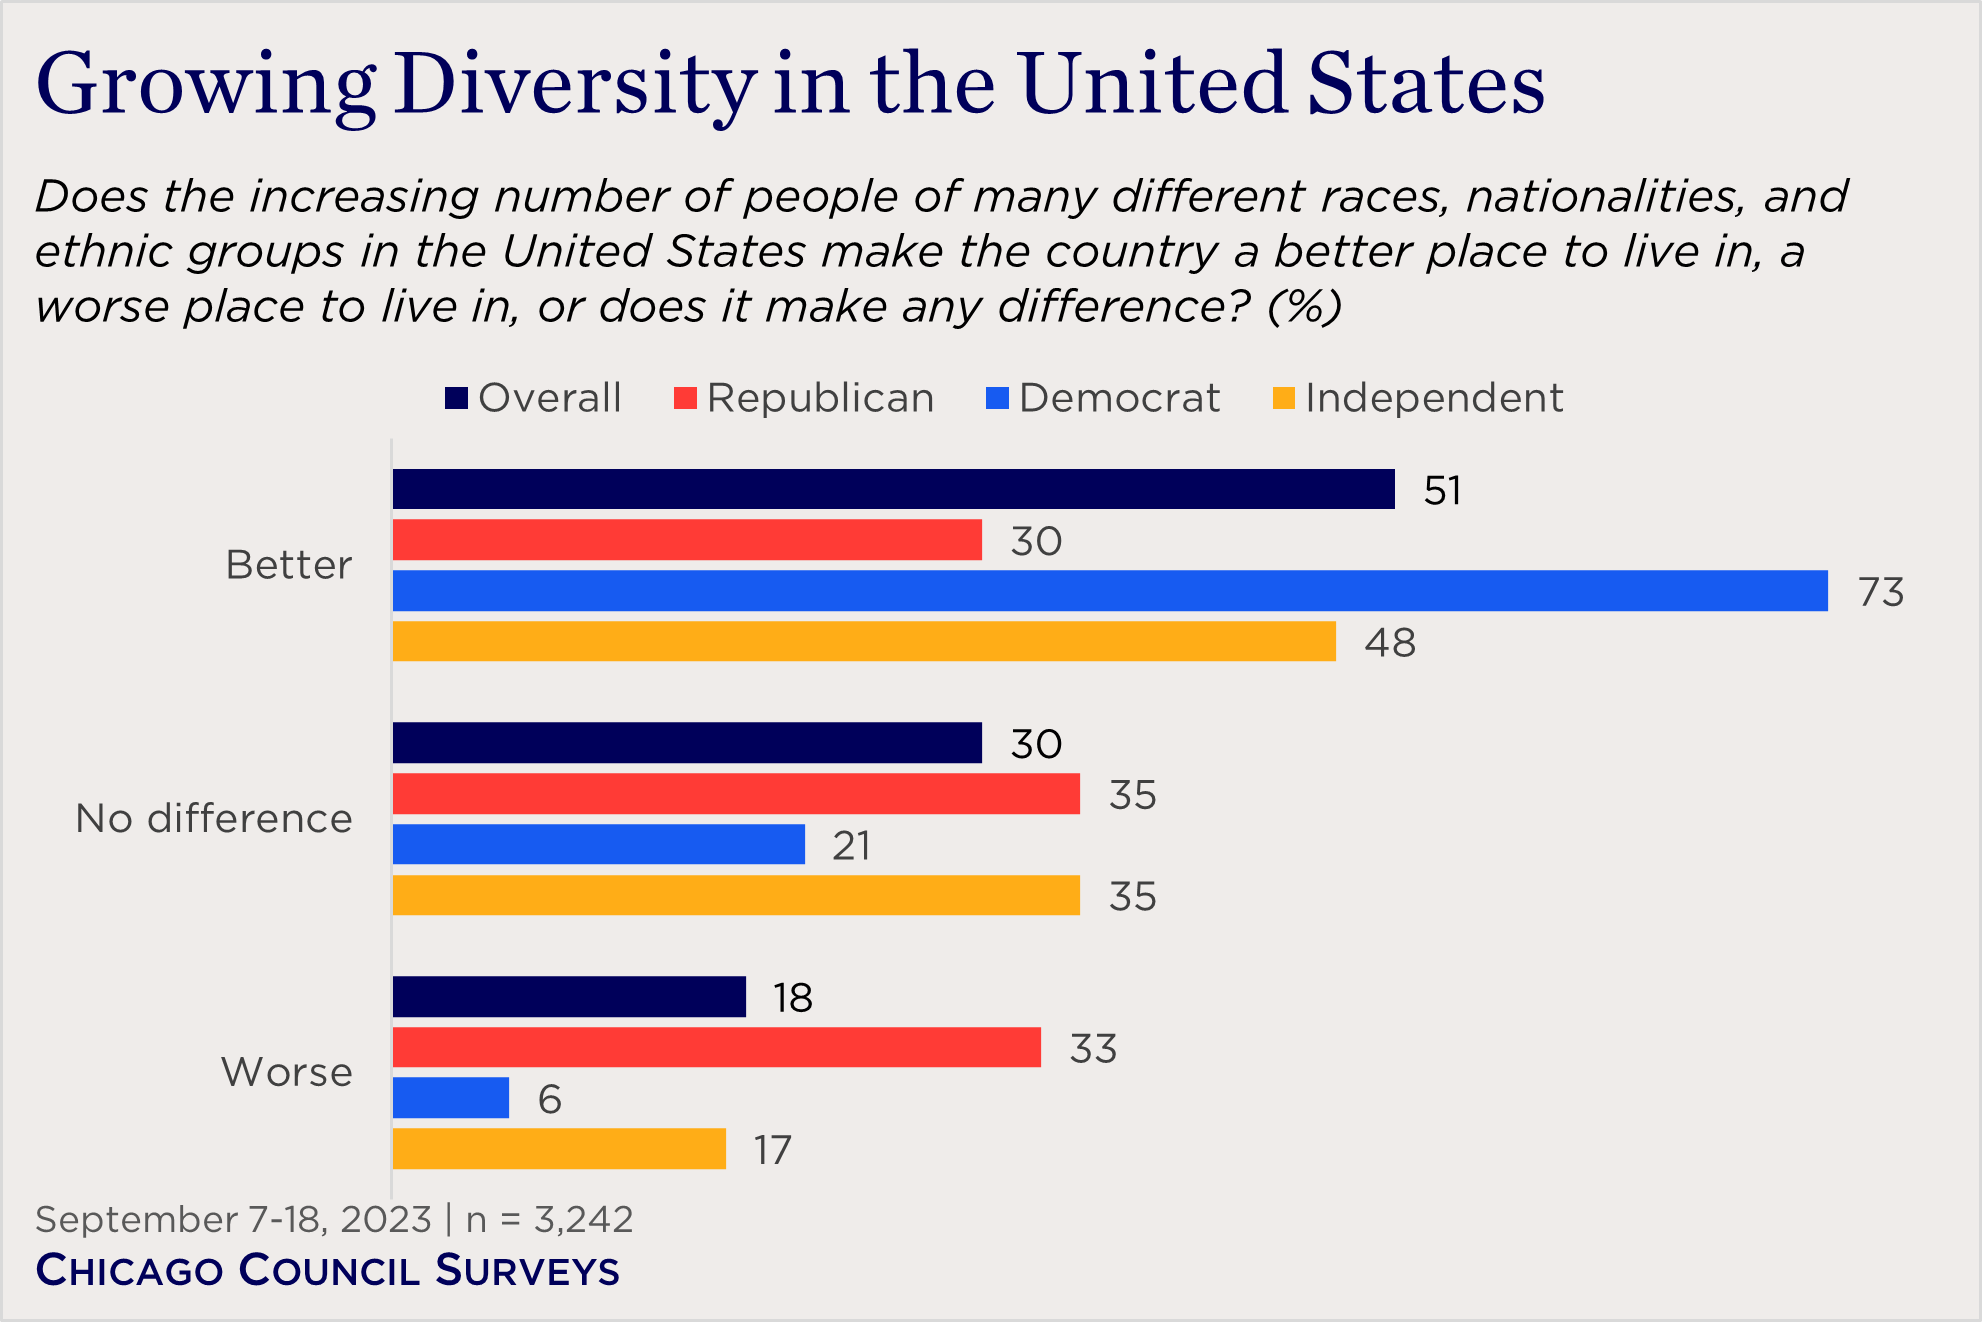 "bar chart of views of growing diversity in the US"